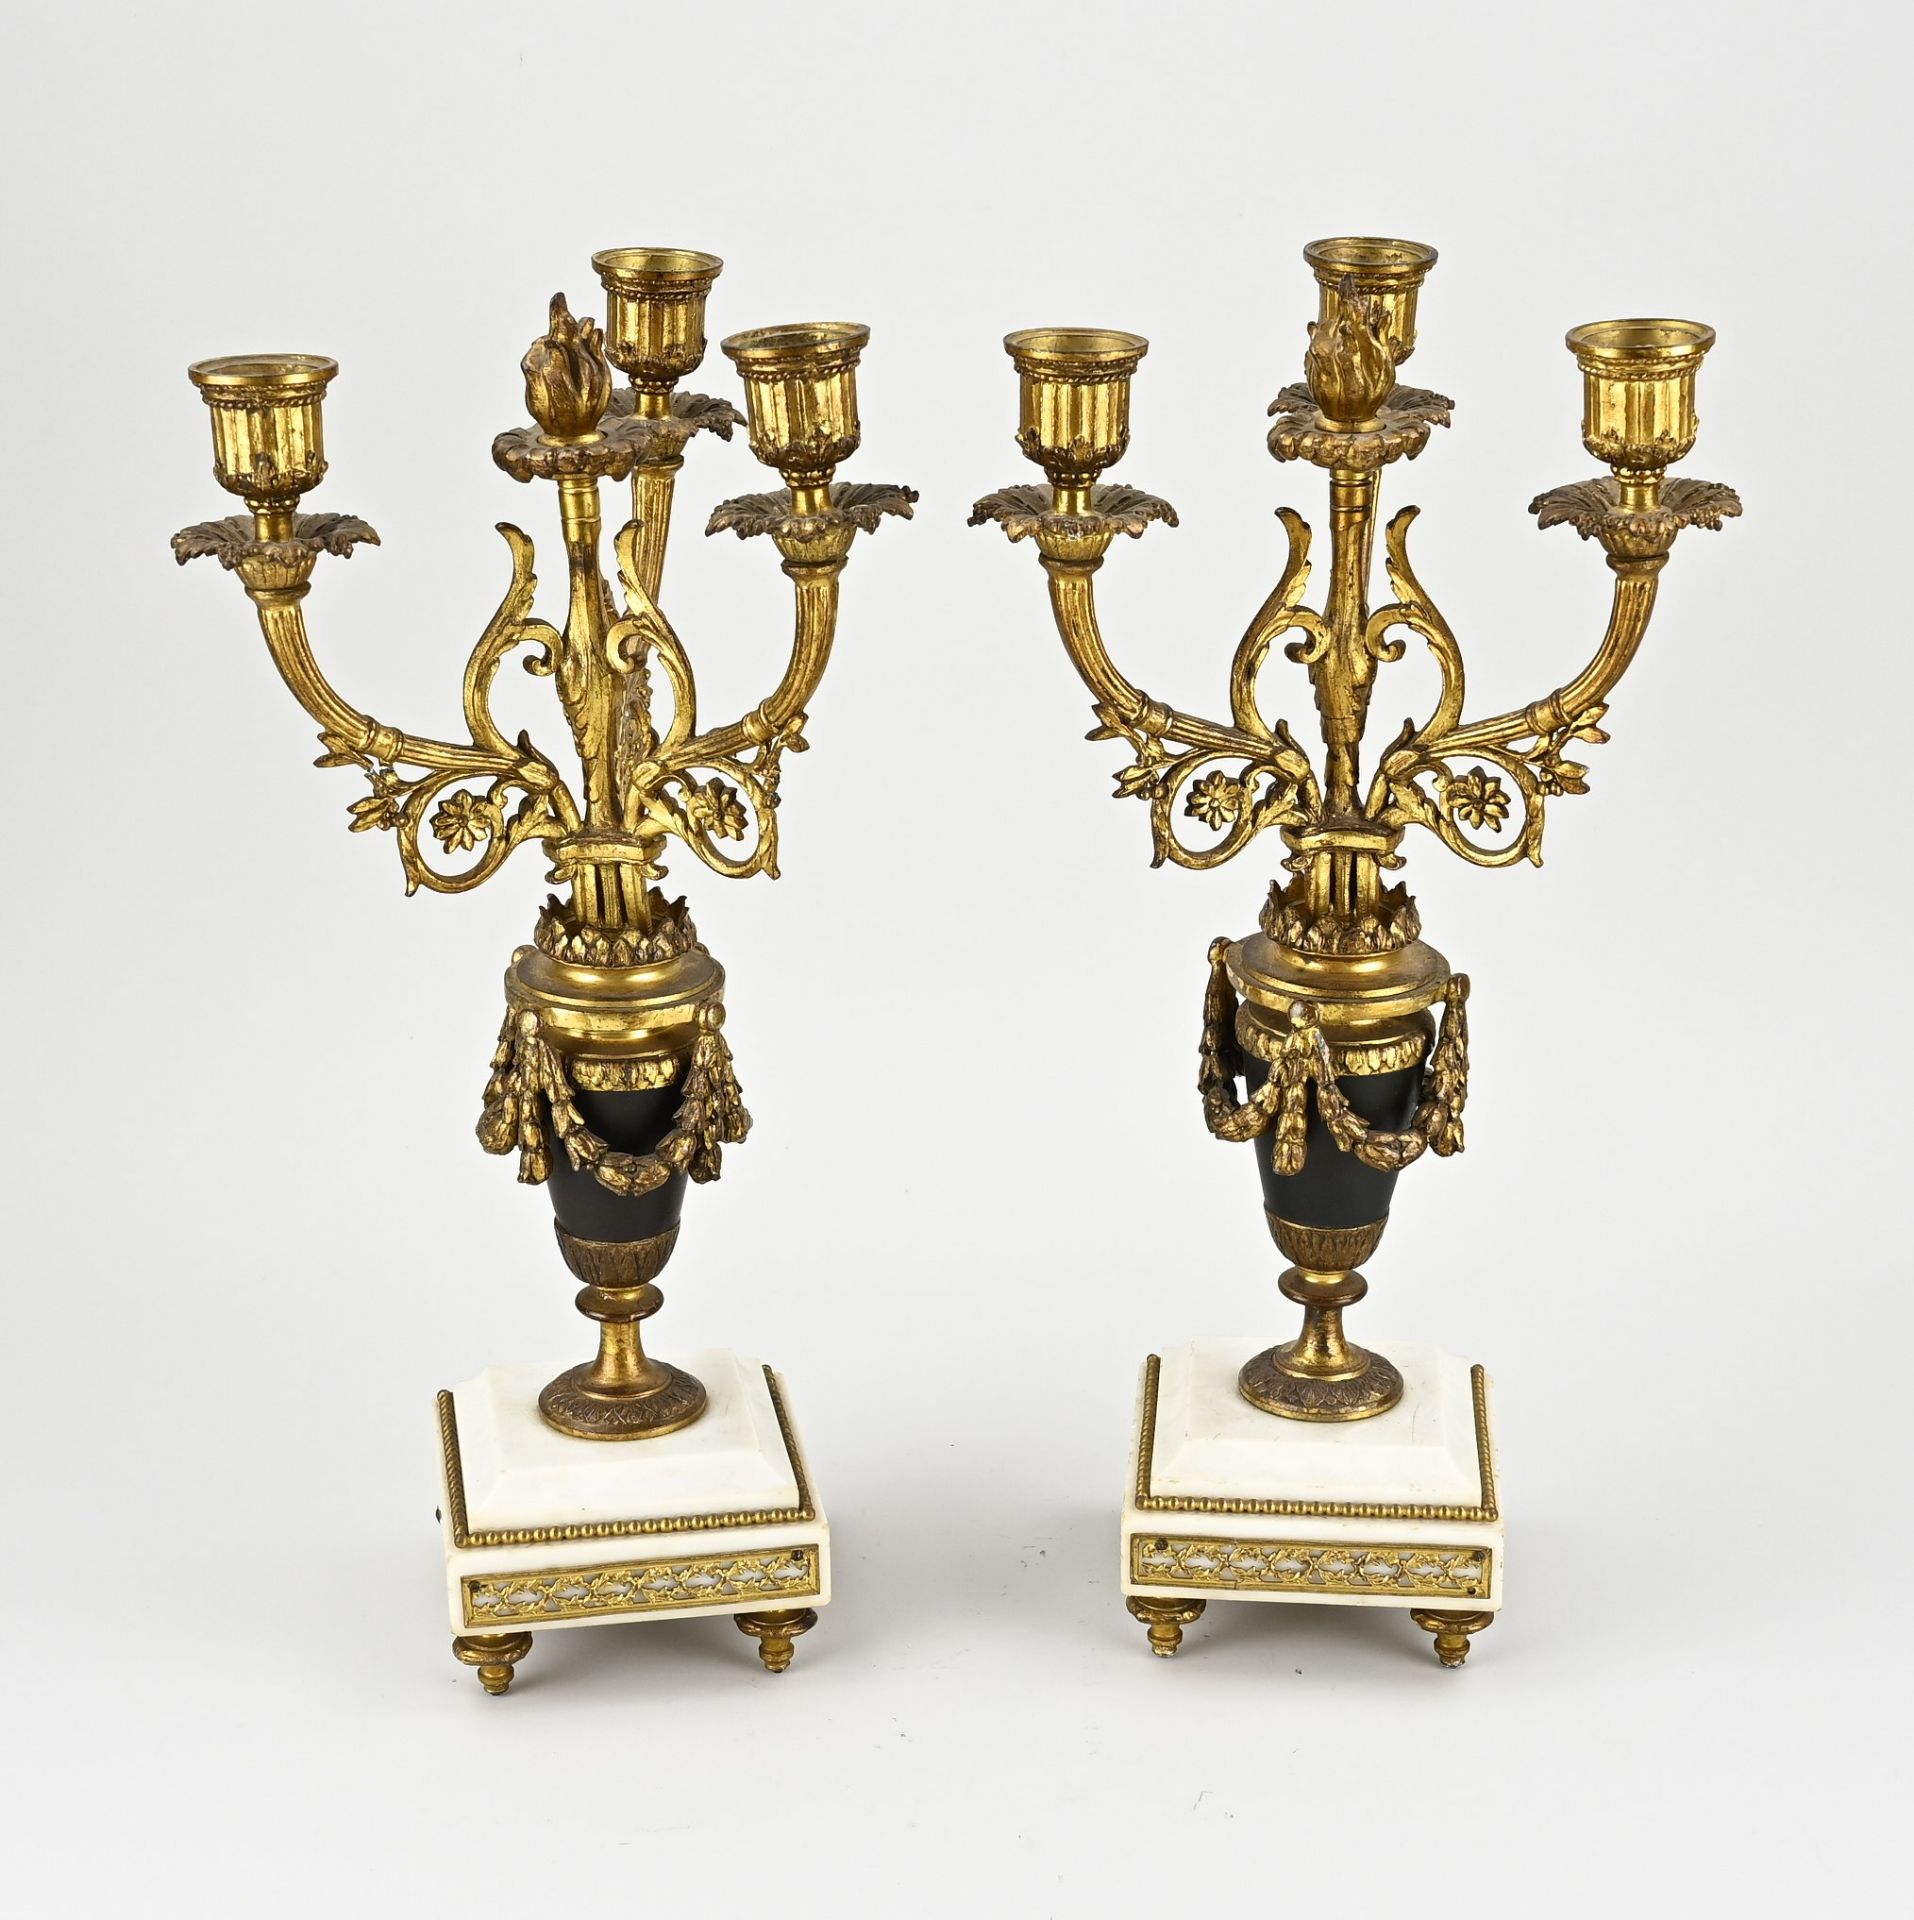 Two antique French candlesticks, H 40 cm.